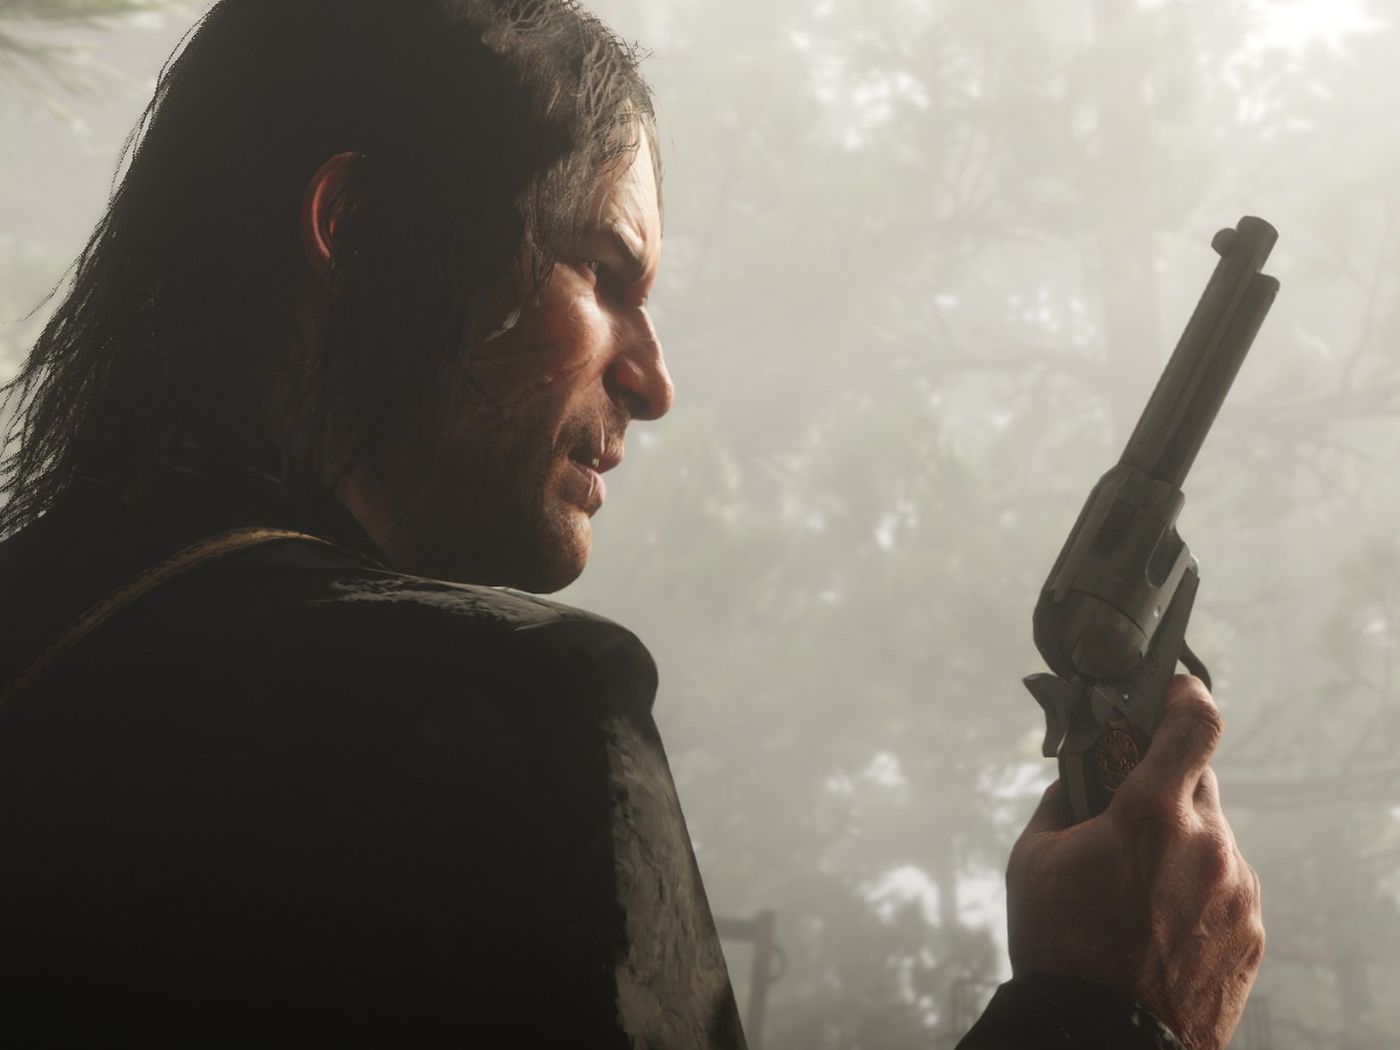 Red Dead Redemption 2 fans' hunt for the real John Marston